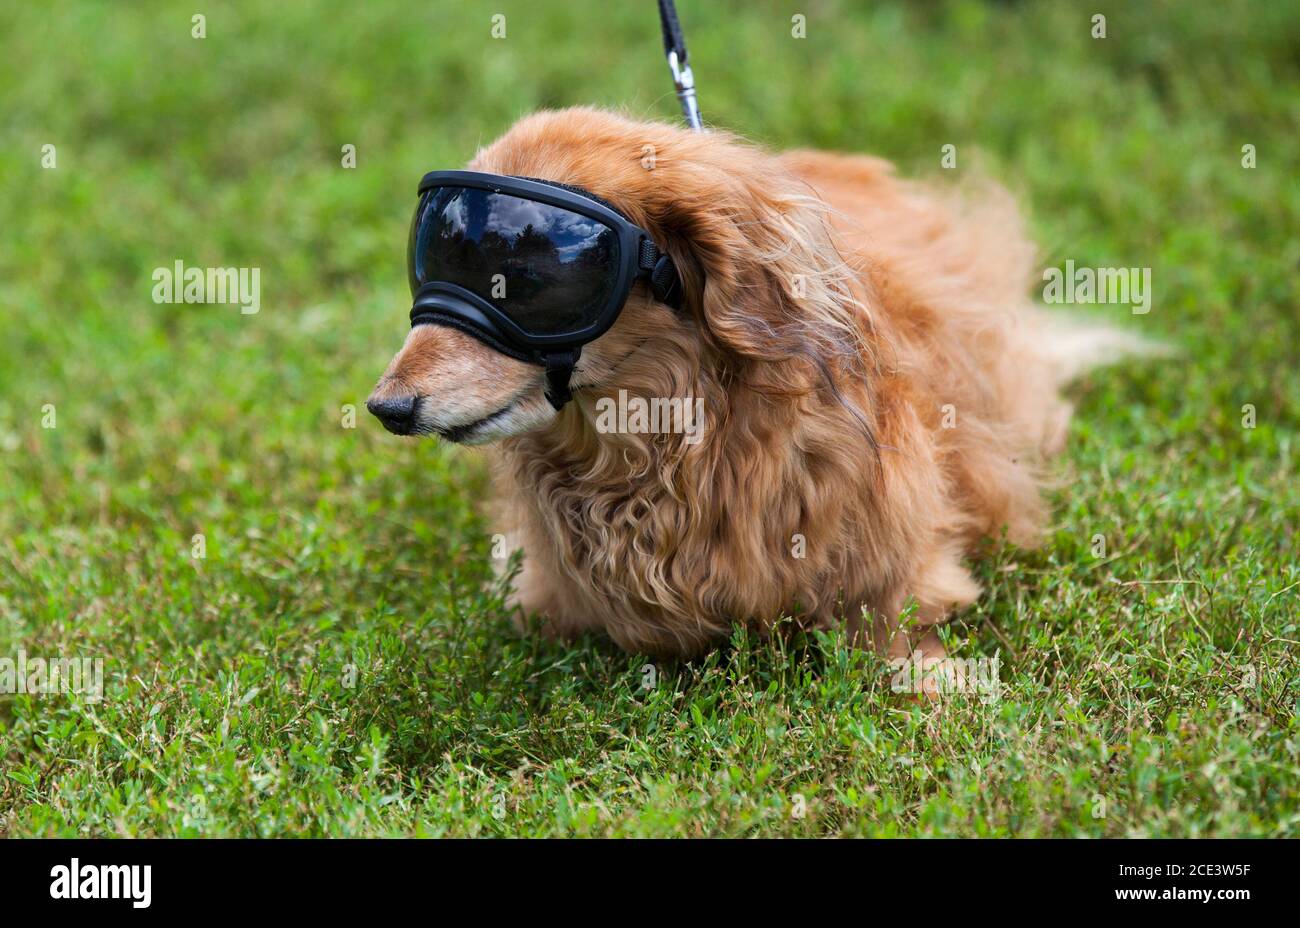 Toronto, Canada. 30th Aug, 2020. A pet dog wearing goggles poses for photos during the 2020 Party 4 Paws event in a park in Toronto, Canada, on Aug. 30, 2020. As a family-friendly event, the pet fair drew hundreds of visitors with their pet dogs on Sunday. Credit: Zou Zheng/Xinhua/Alamy Live News Stock Photo